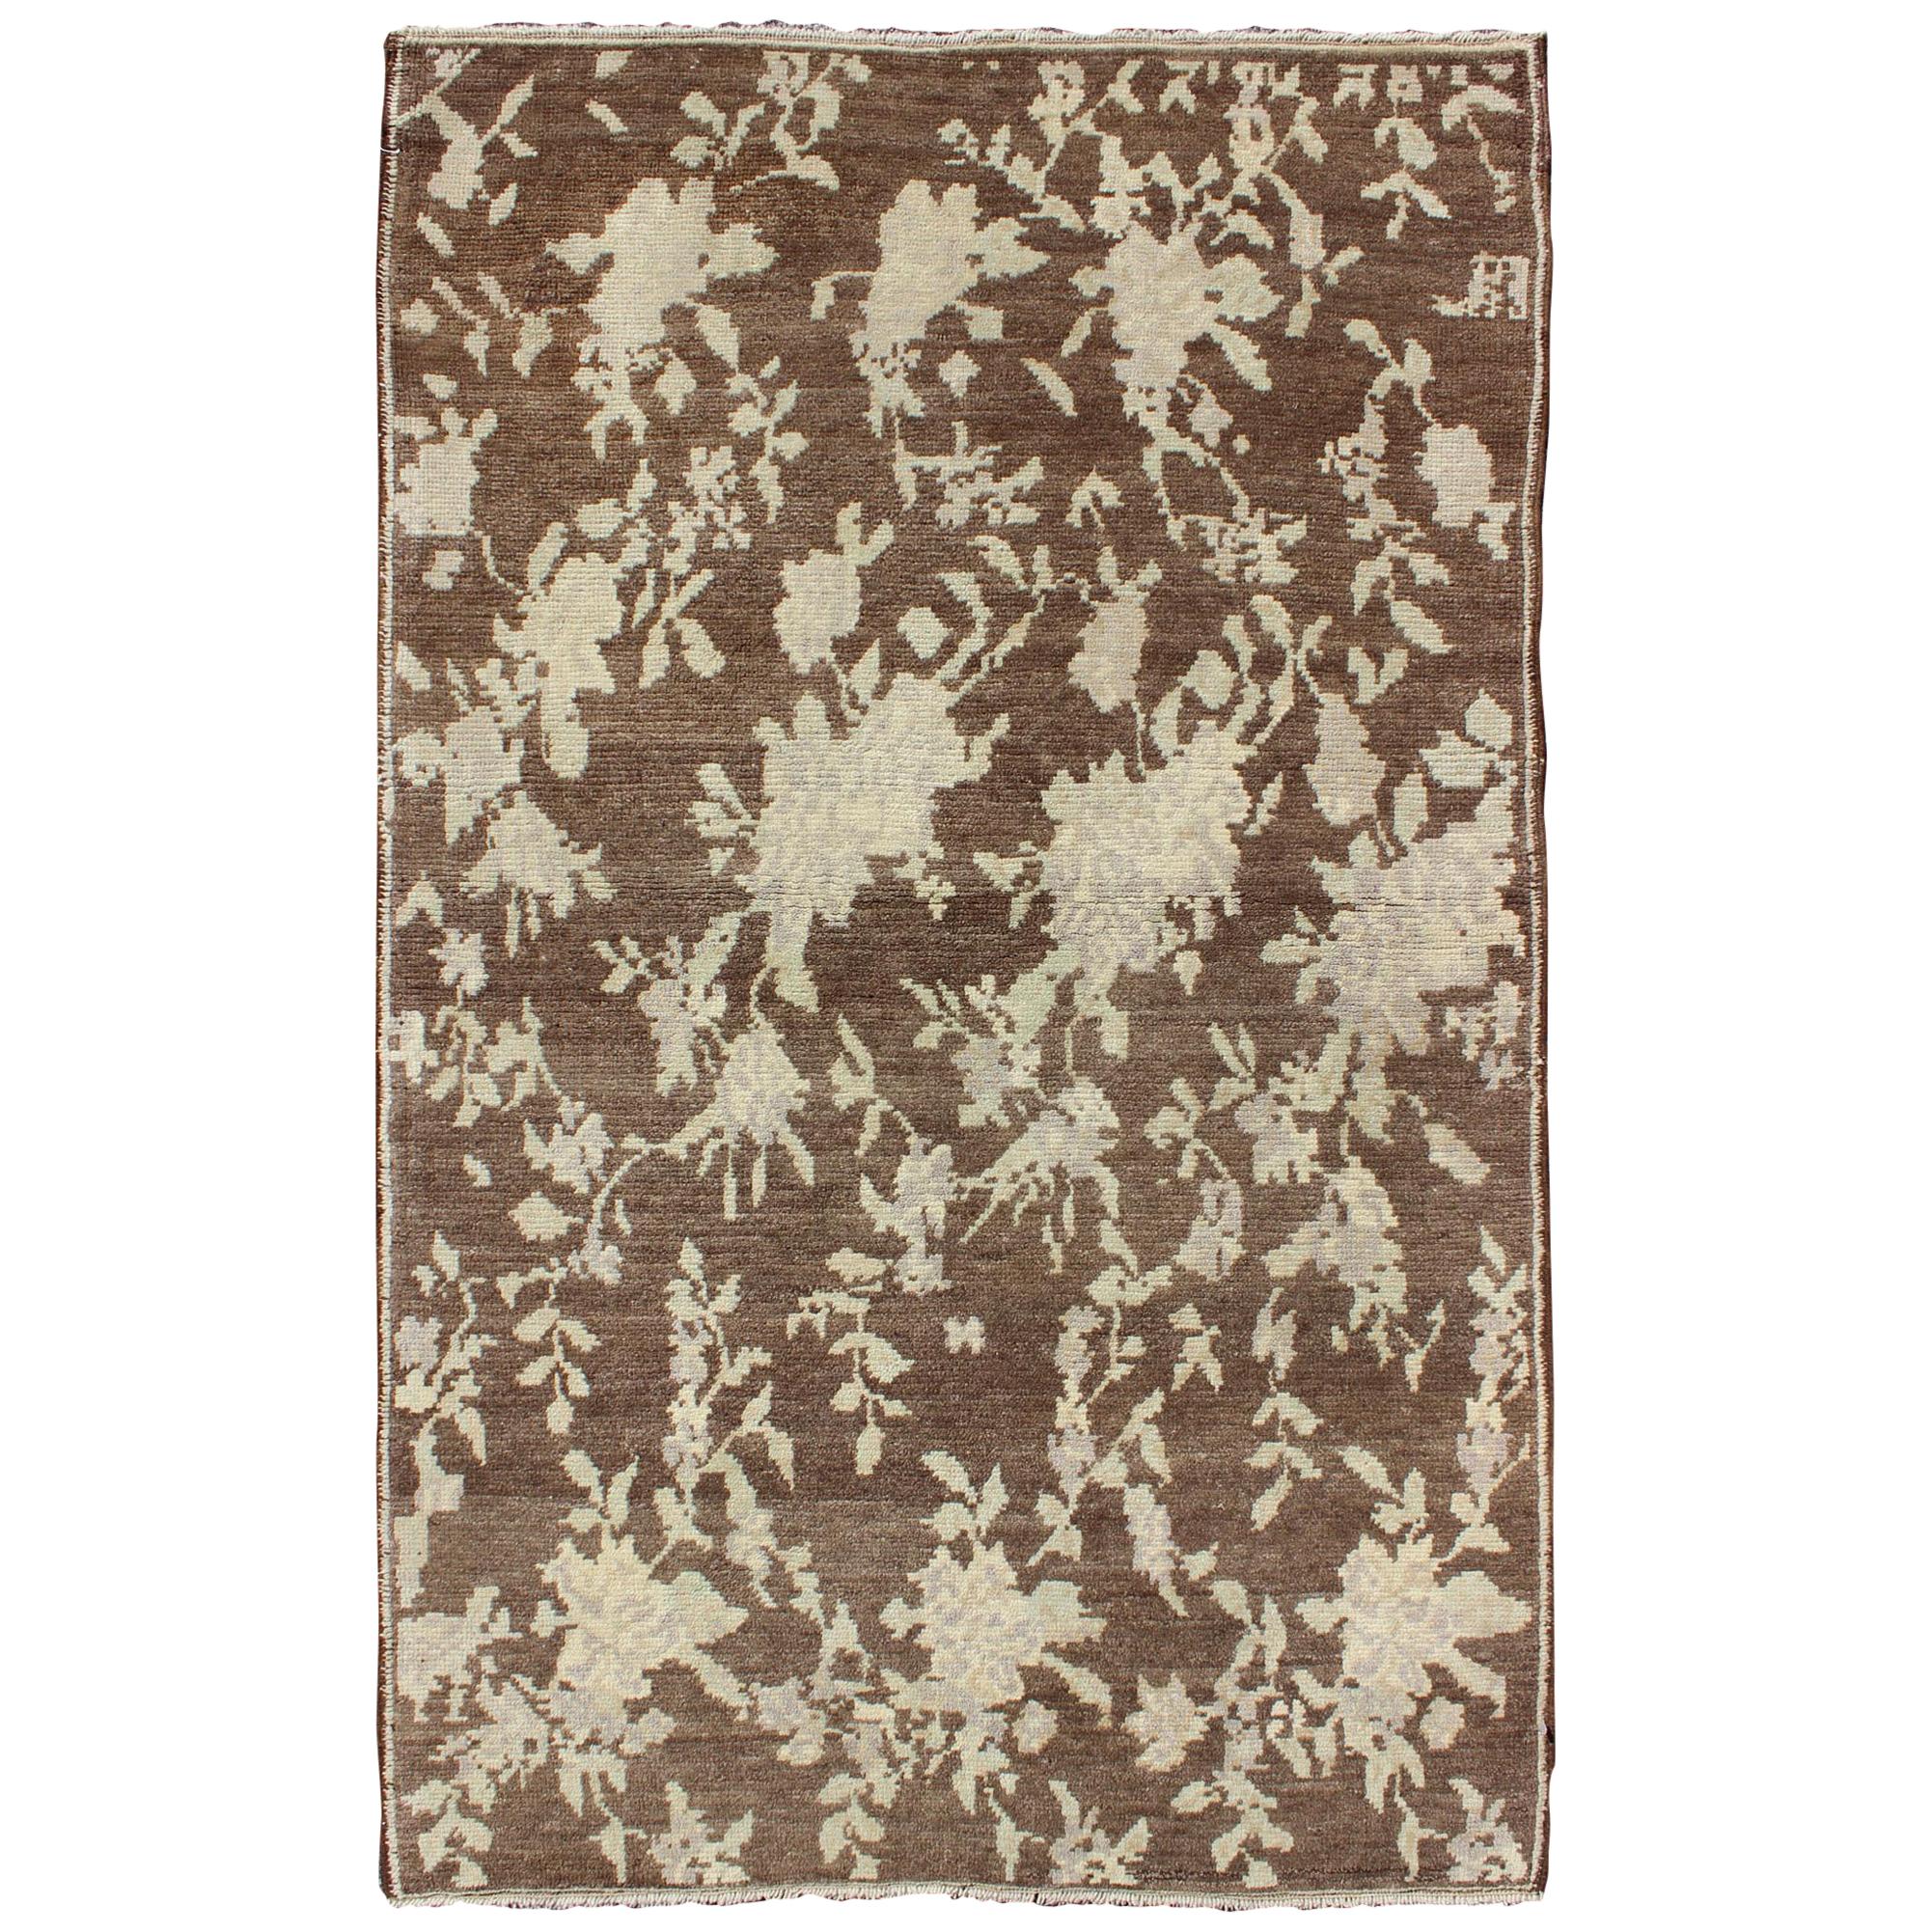 Mocha Vintage Turkish Oushak Rug with Free-Flowing Green & Cream Flower Blossoms For Sale